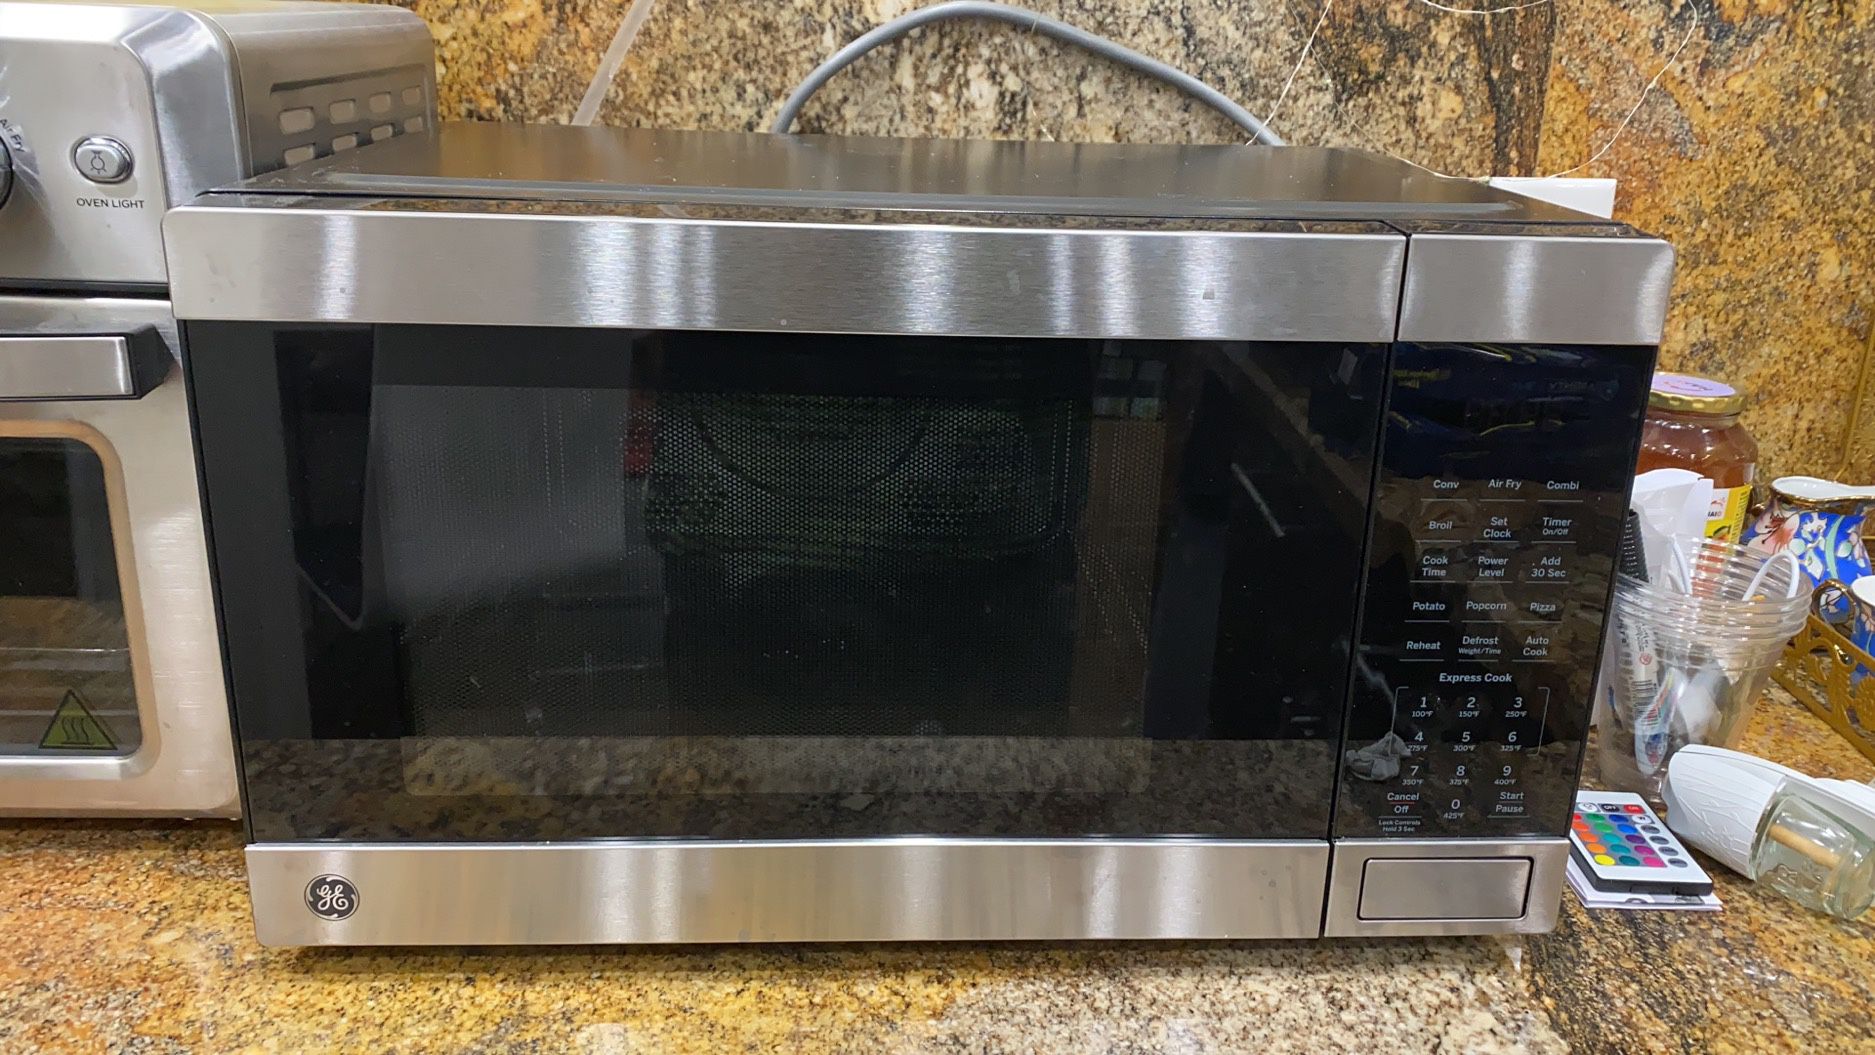 3in1 Countertop Microwave Oven Complete With Air Fryer, Broiler  Convection  Mode 1.0 Cubic Feet Capacity, 1,050 Watts Kitchen Essentials for for  Sale in Las Vegas, NV OfferUp